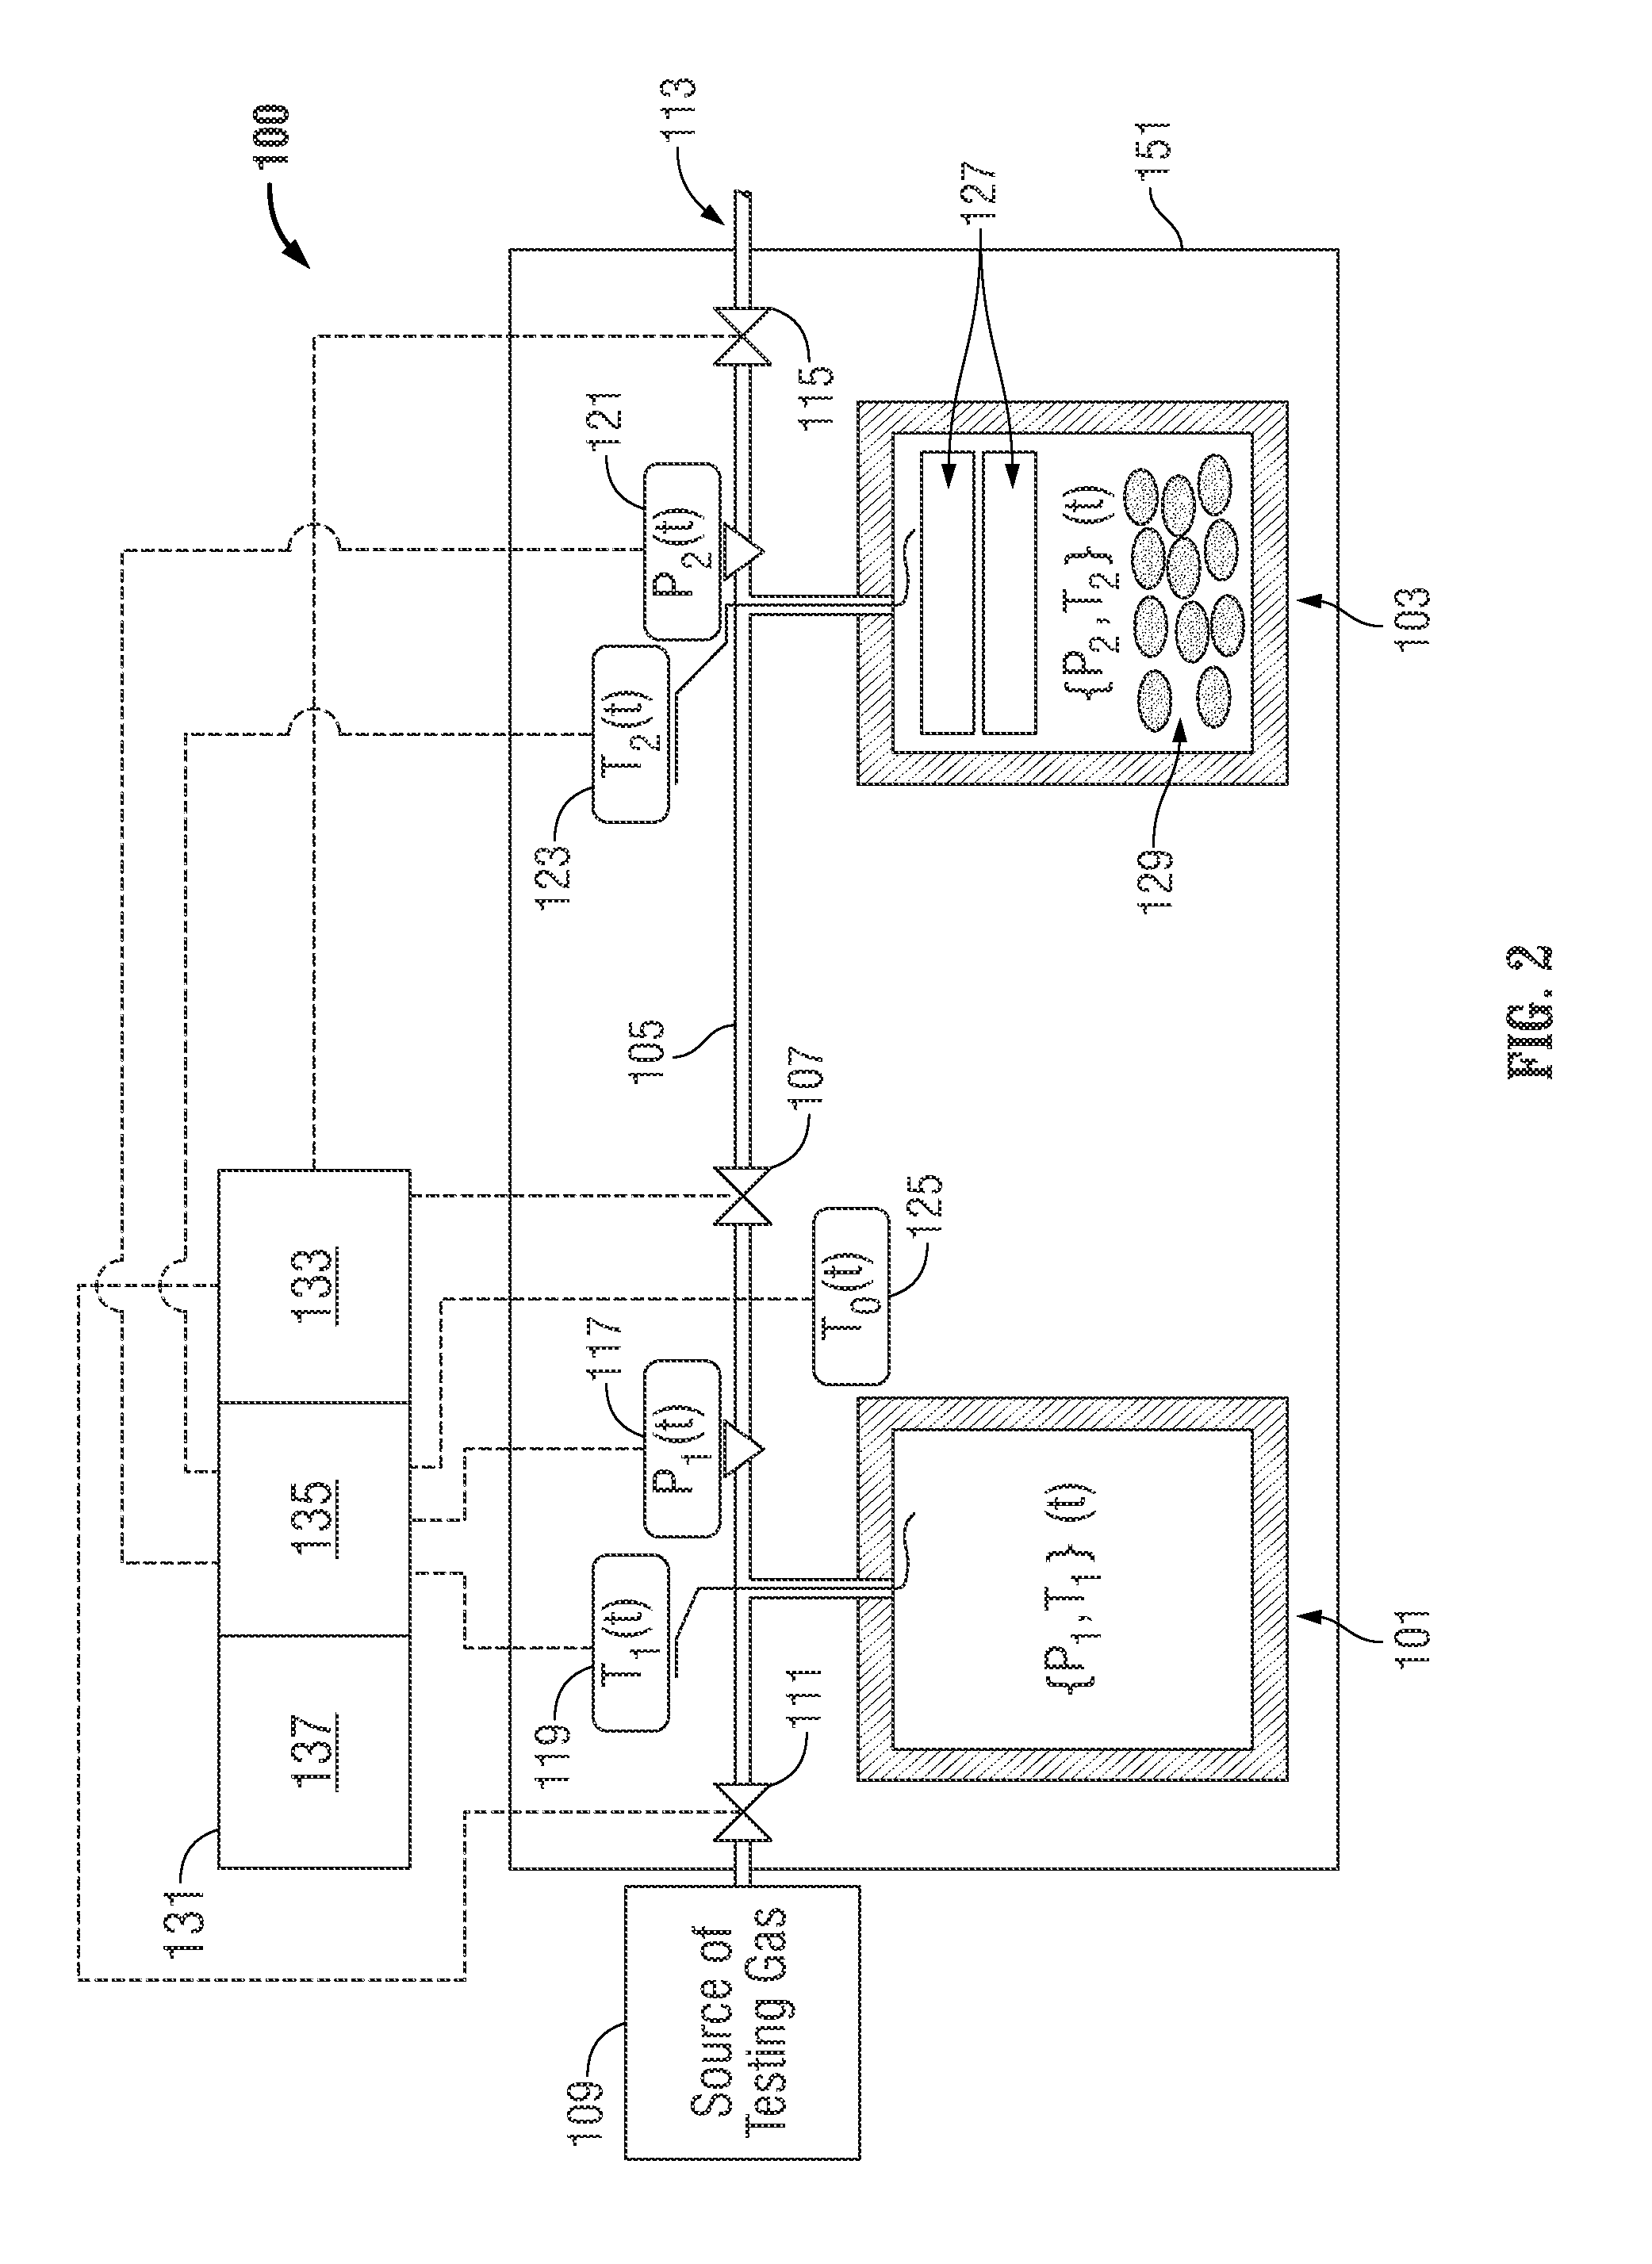 Apparatus and methodology for measuring properties of microporous material at multiple scales